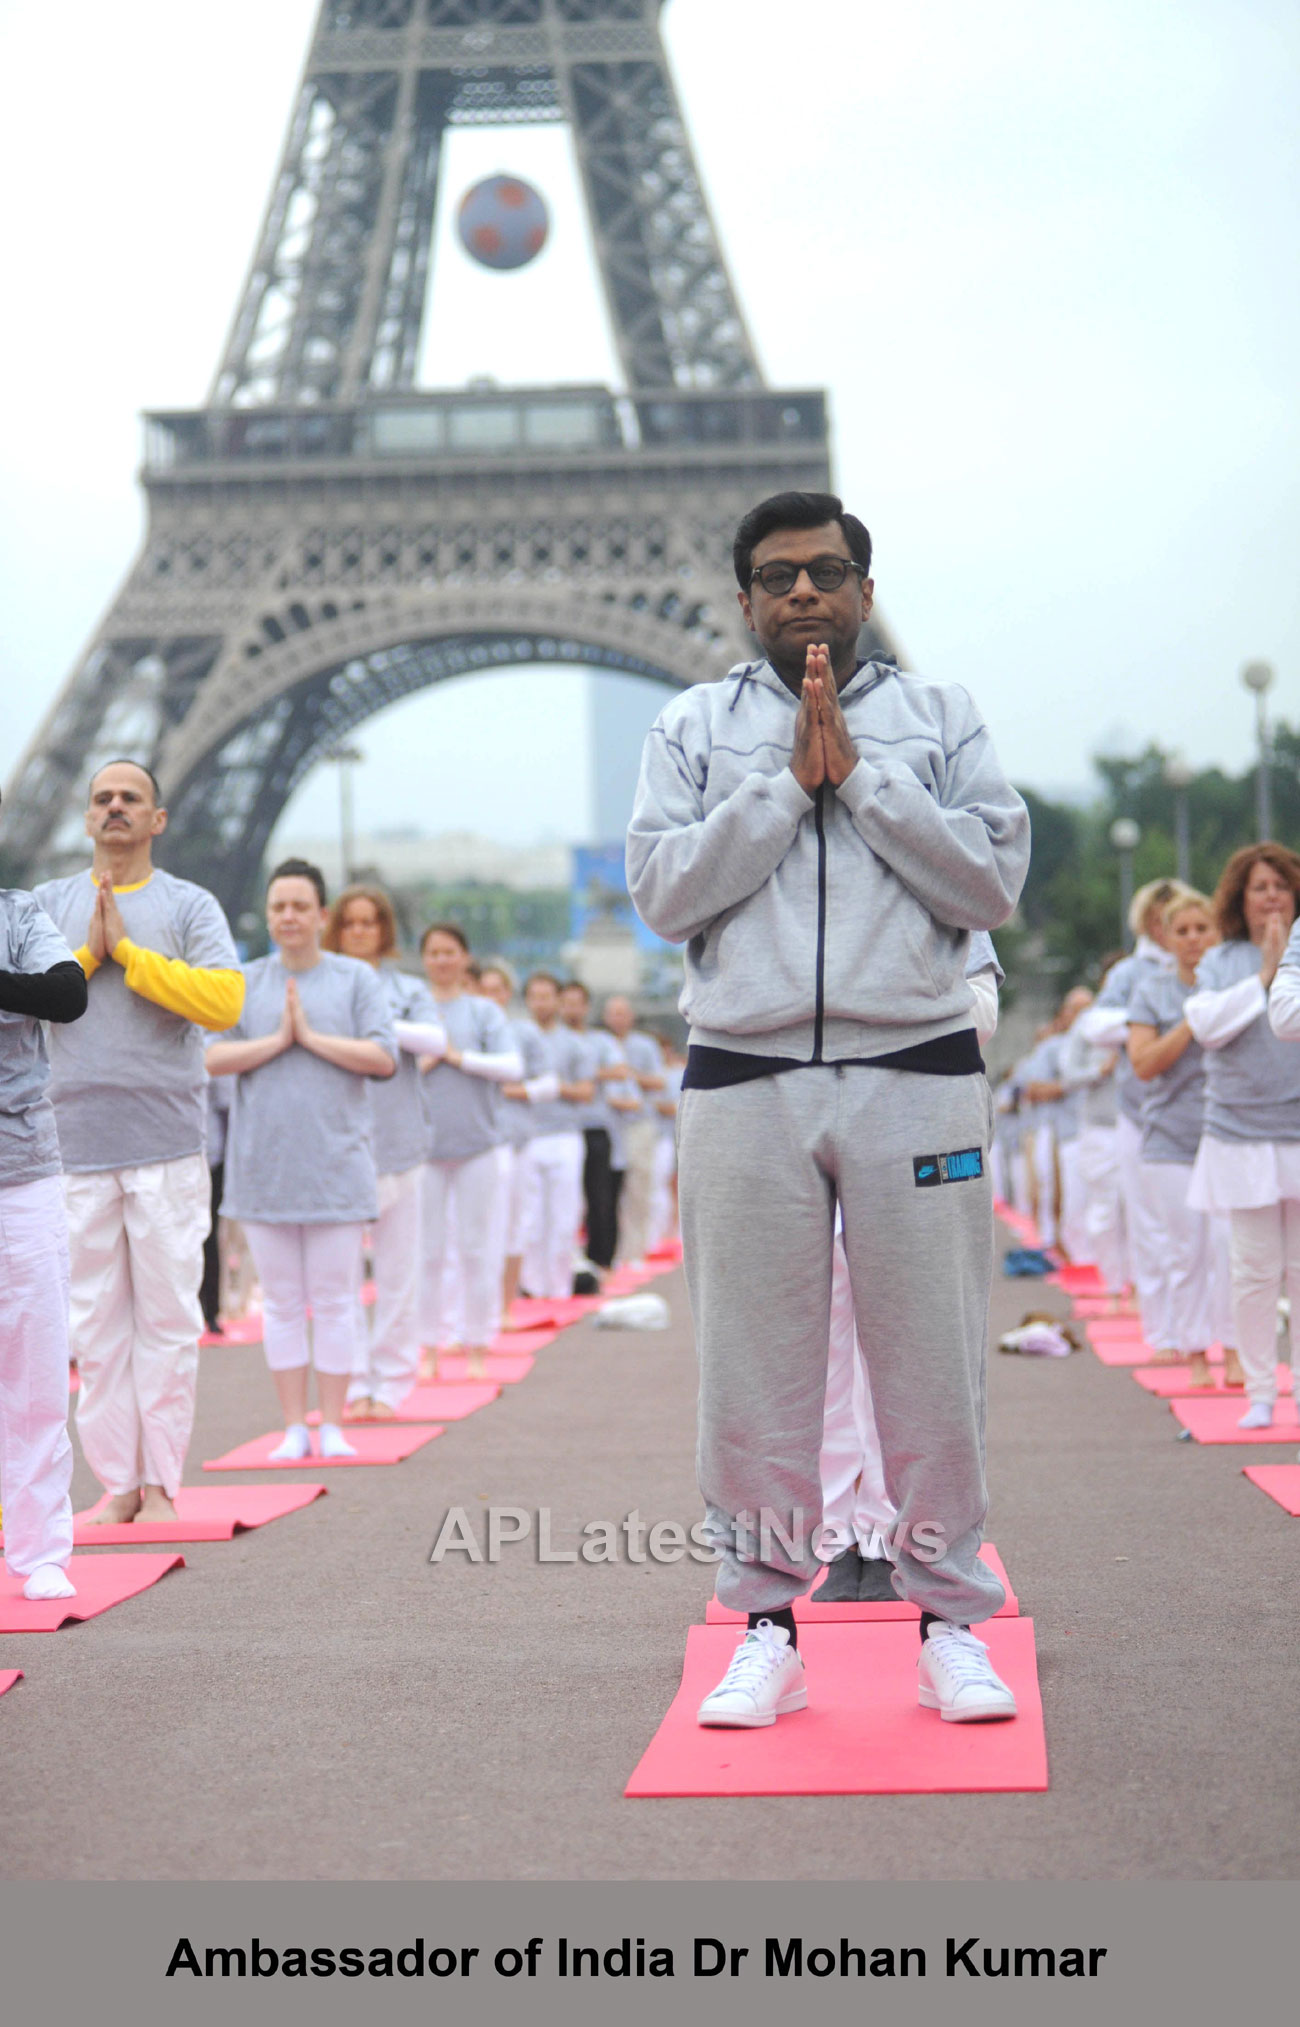 Euro Cup and Yoga Festival at Eiffel Tower Rocked Paris - Picture 9